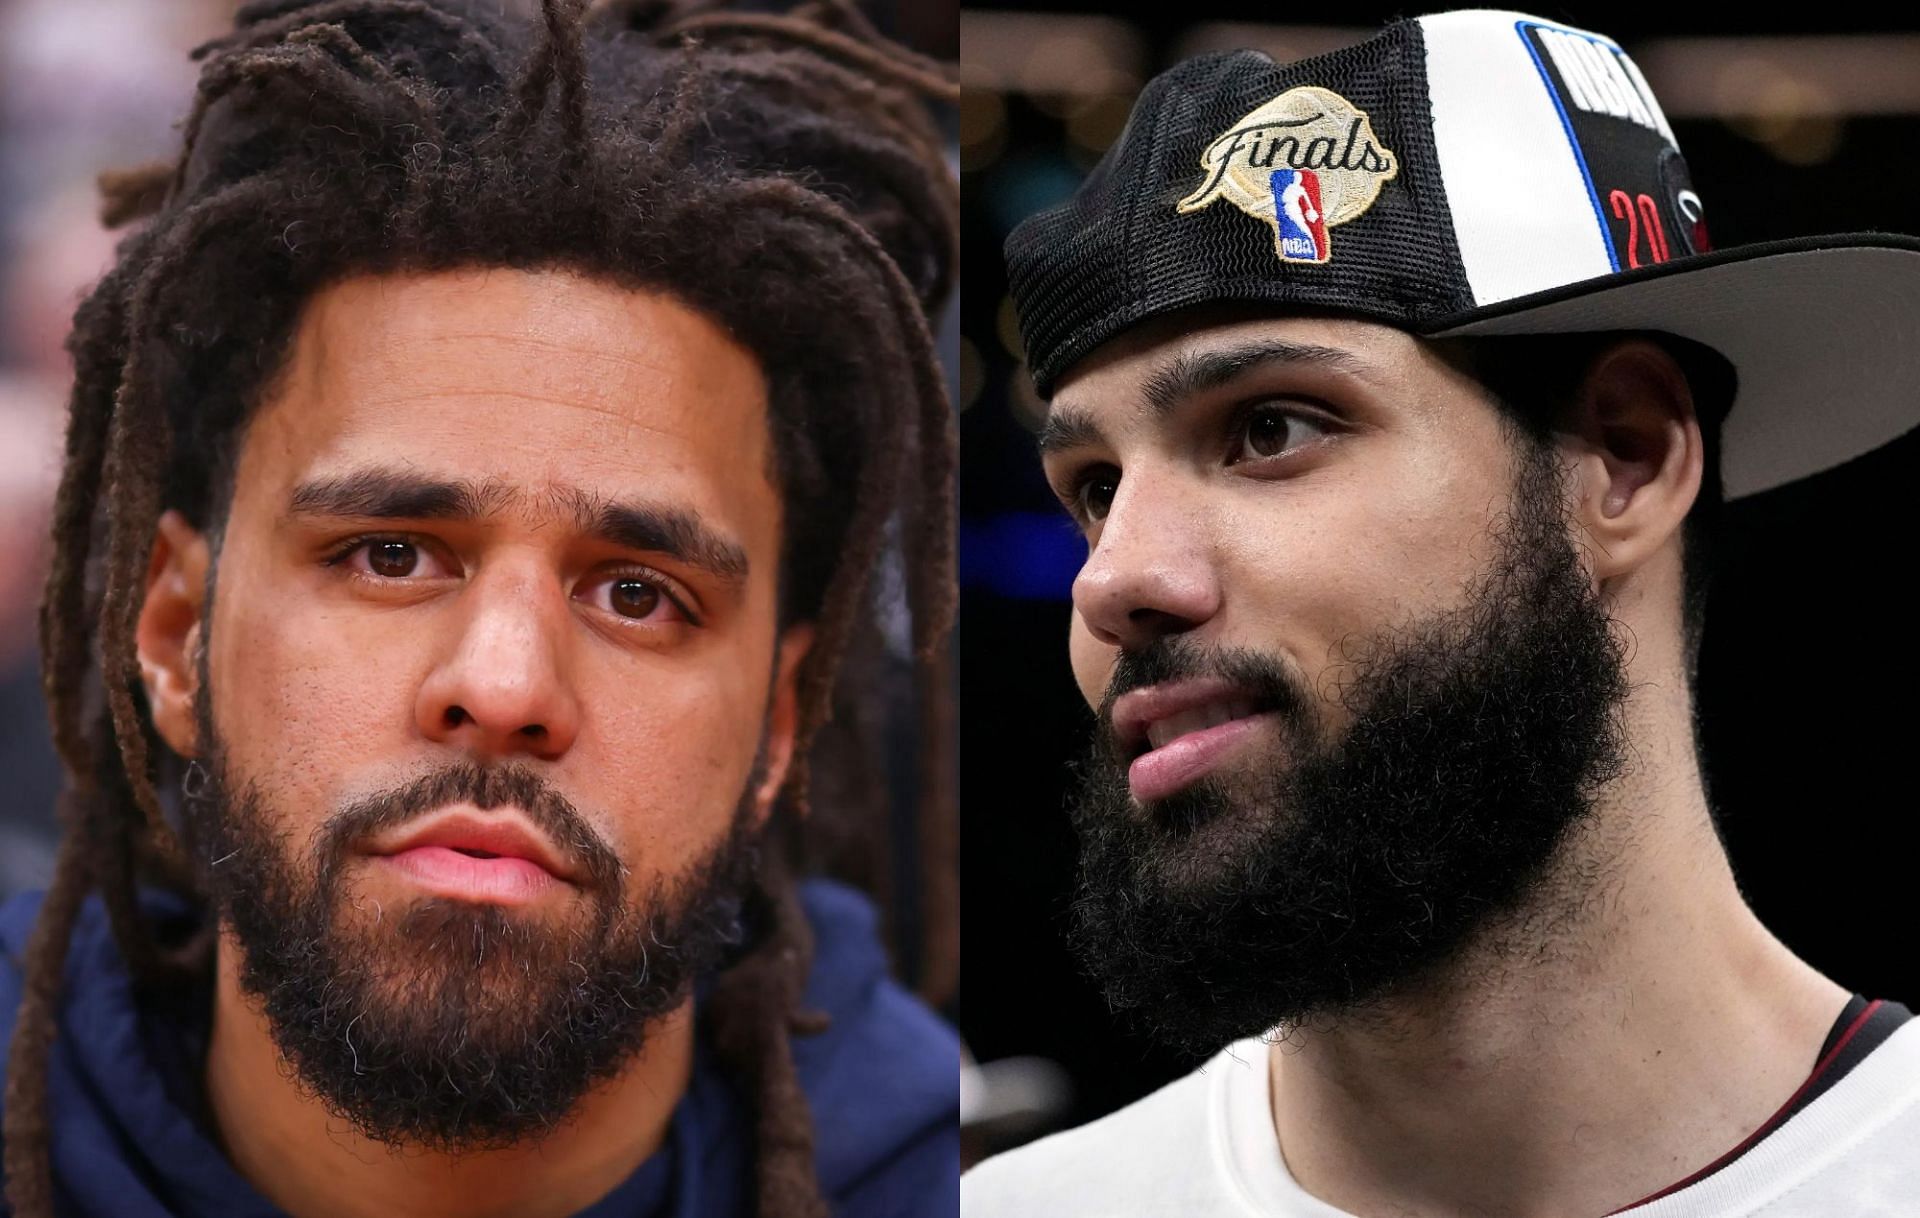 Caleb Martin owes J. Cole on giving his NBA career a fresh start with the Miami Heat